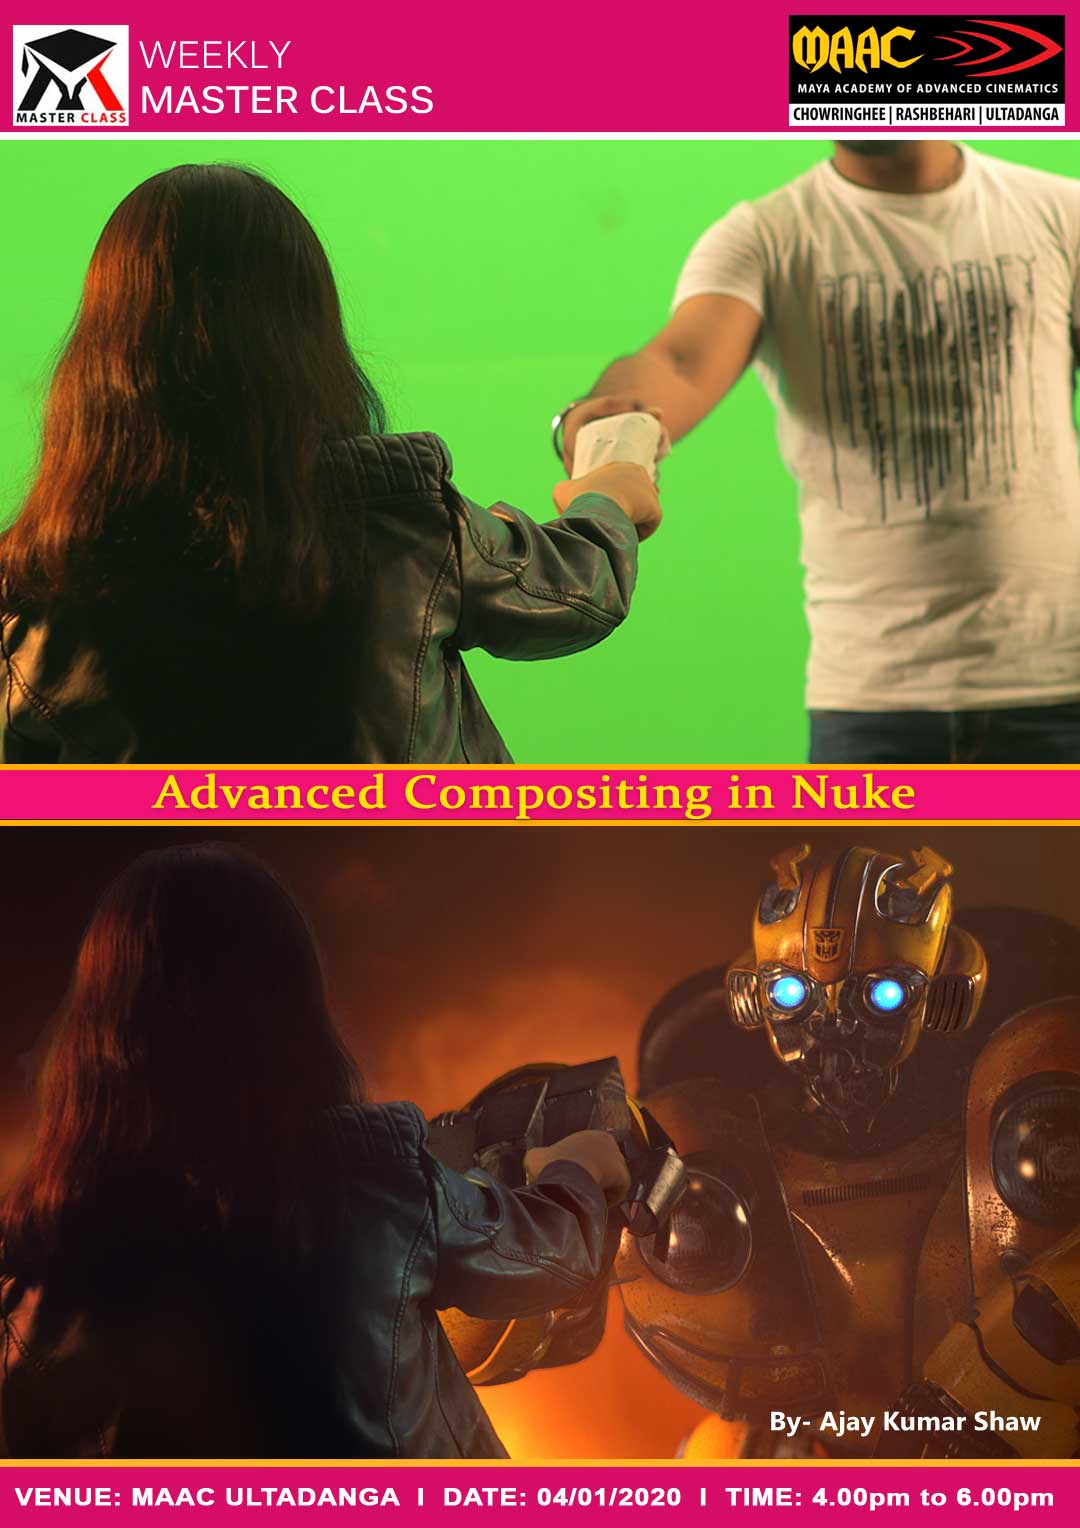 Weekly Master Class on Advanced Compositing in Nuke